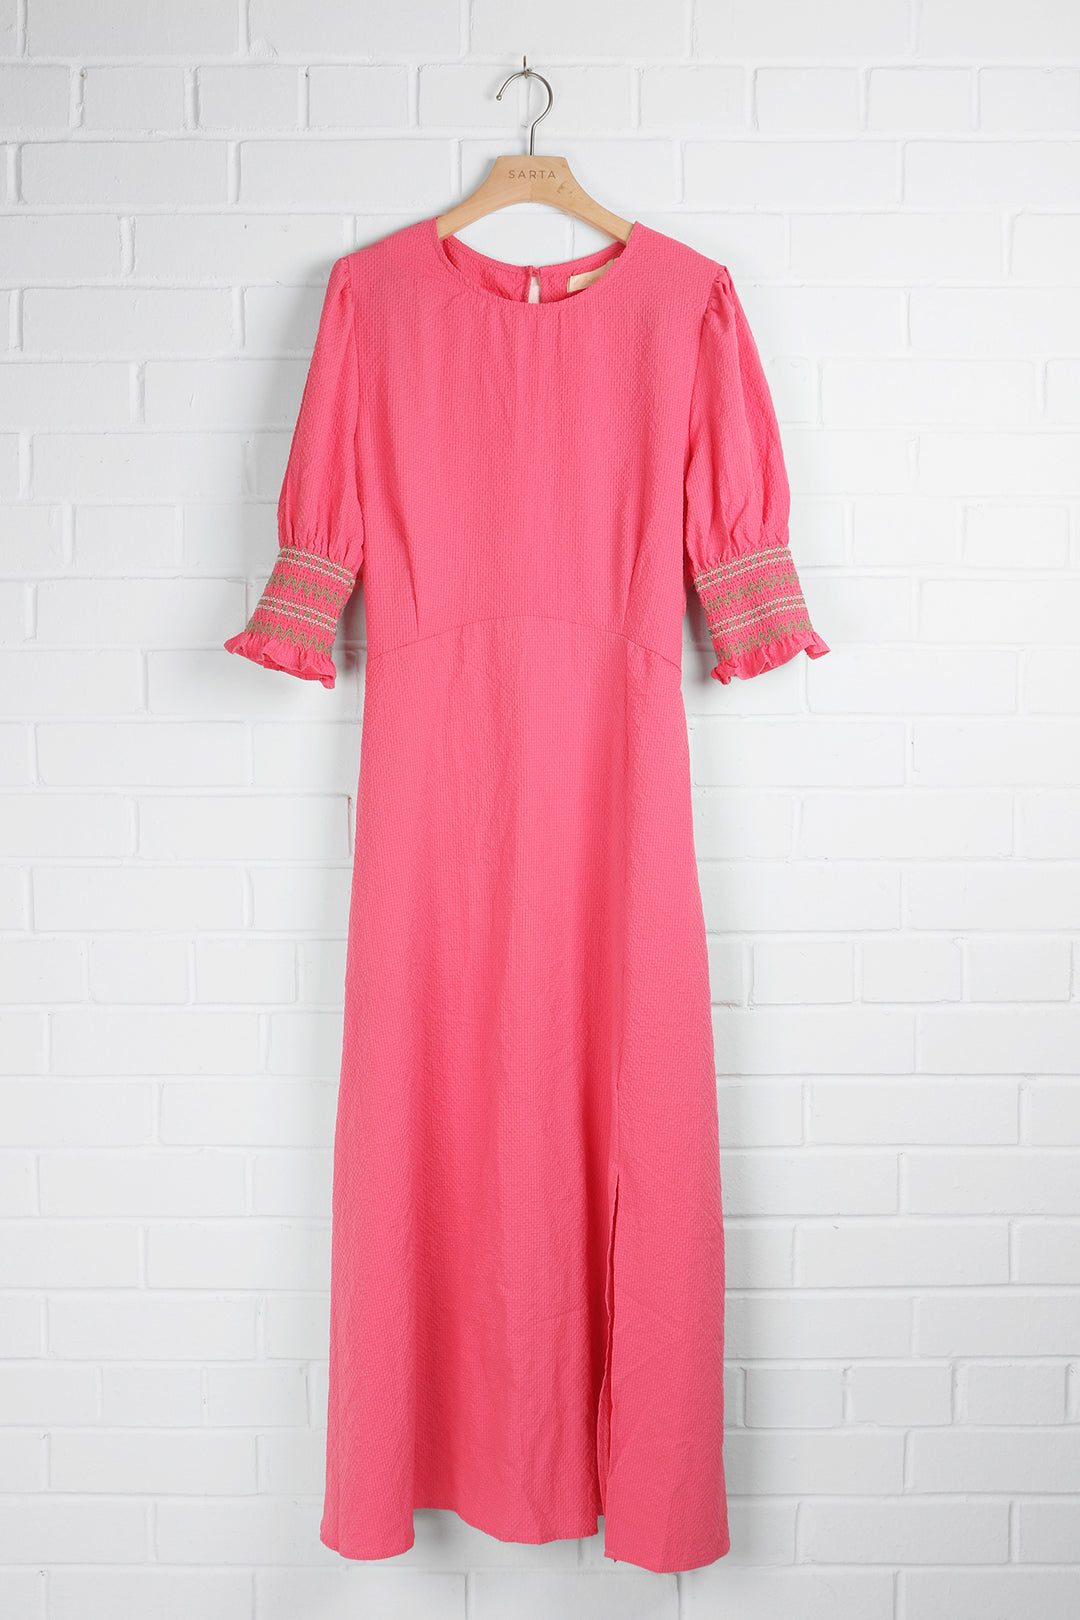 pink tea dress with green embroidered shirred cuff sleeves and a round neck